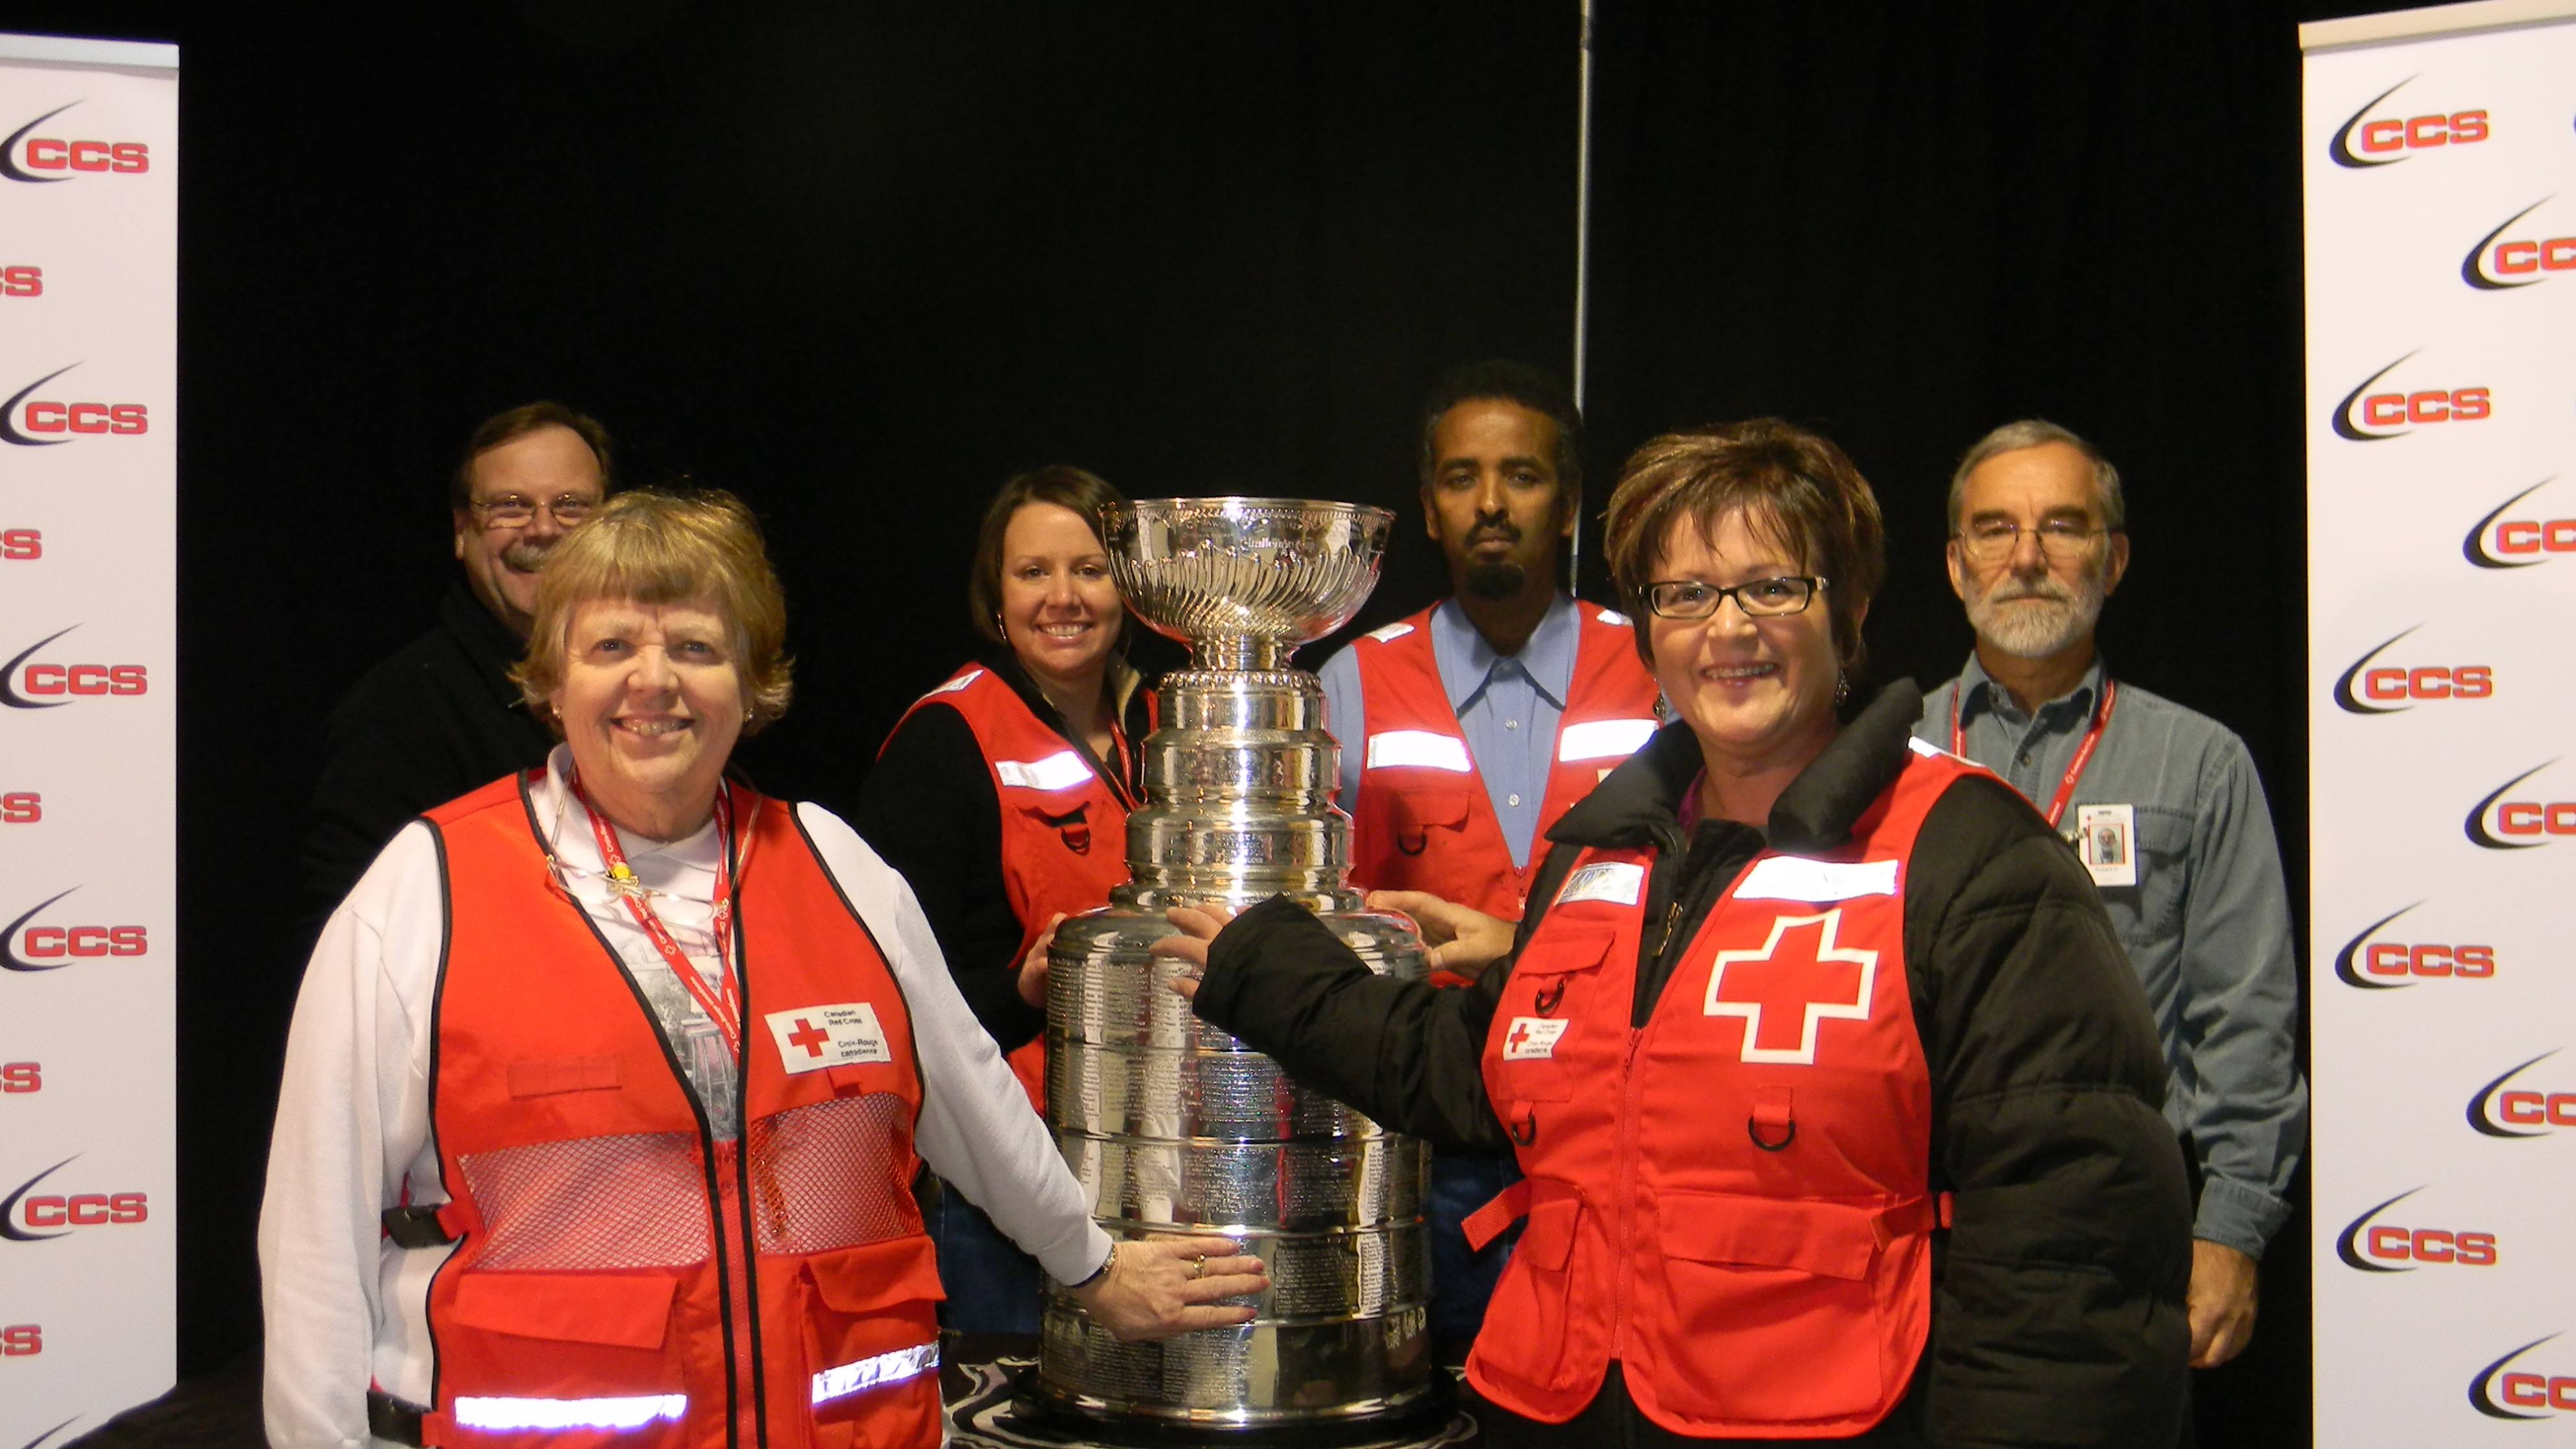 Red Cross personnel with Lord Stanley's Cup.